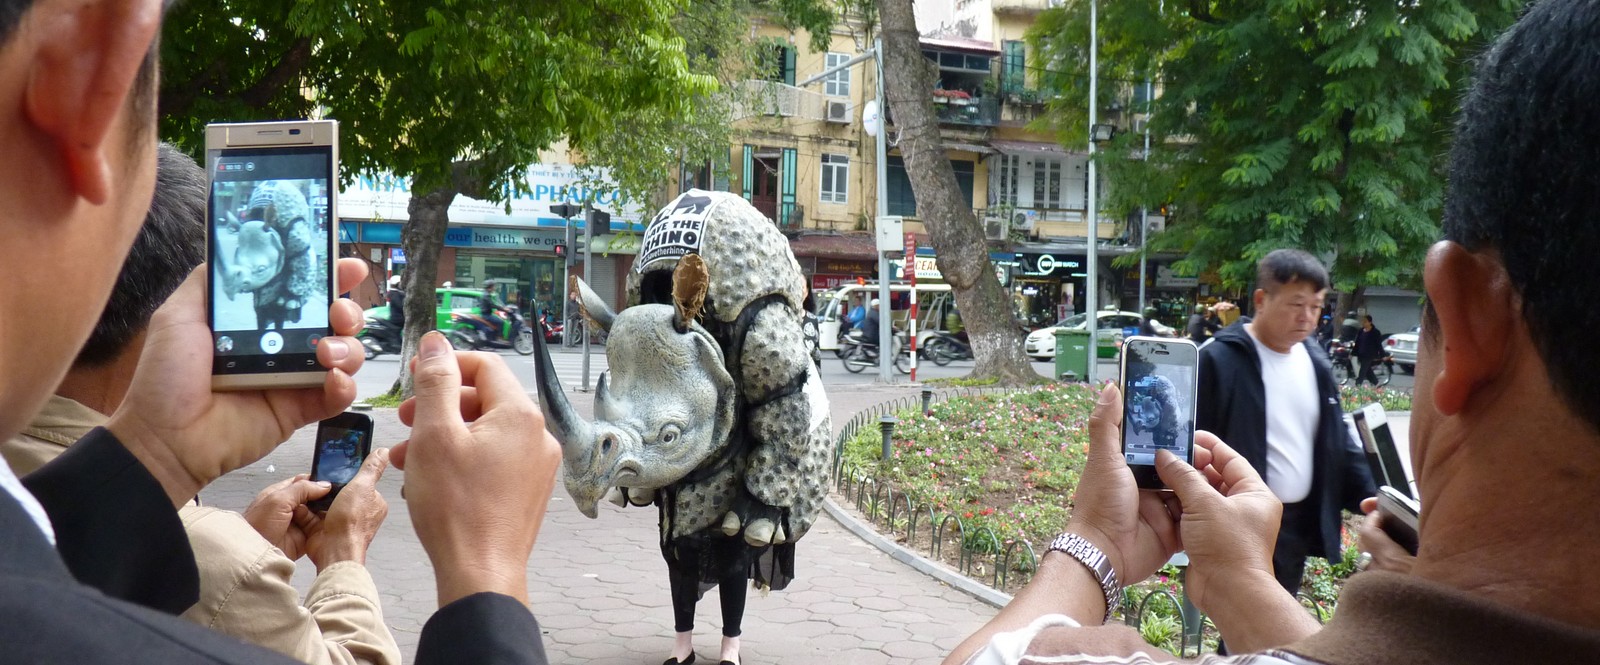 Image of a rhino costume attracting public attention in Vietnam